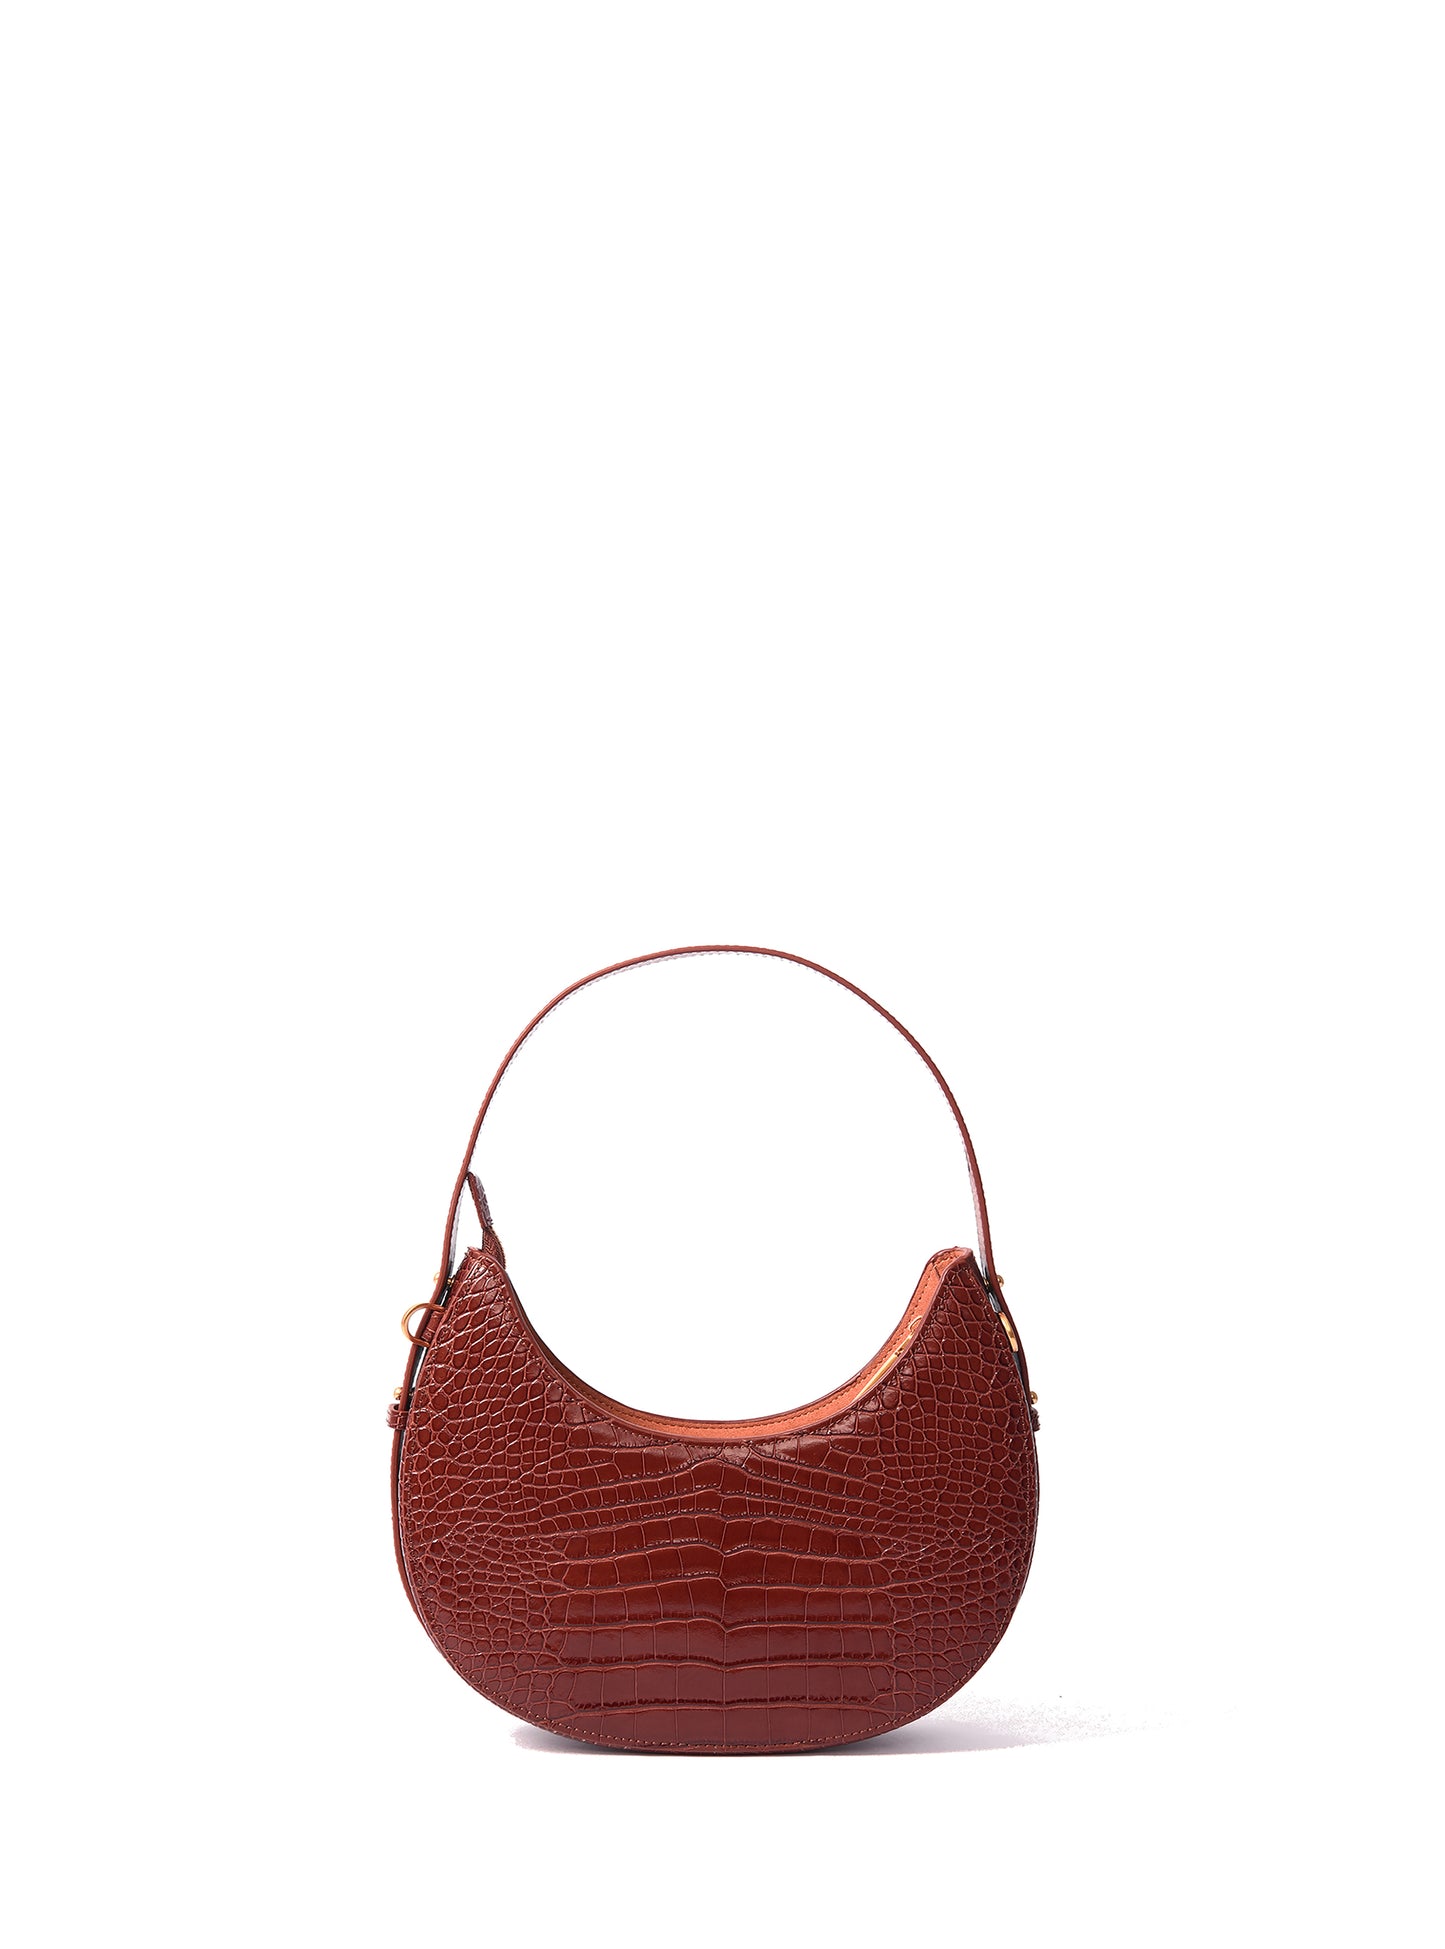 Naomi Leather Moon Bag with Croc-Embossed Pattern, Caramel